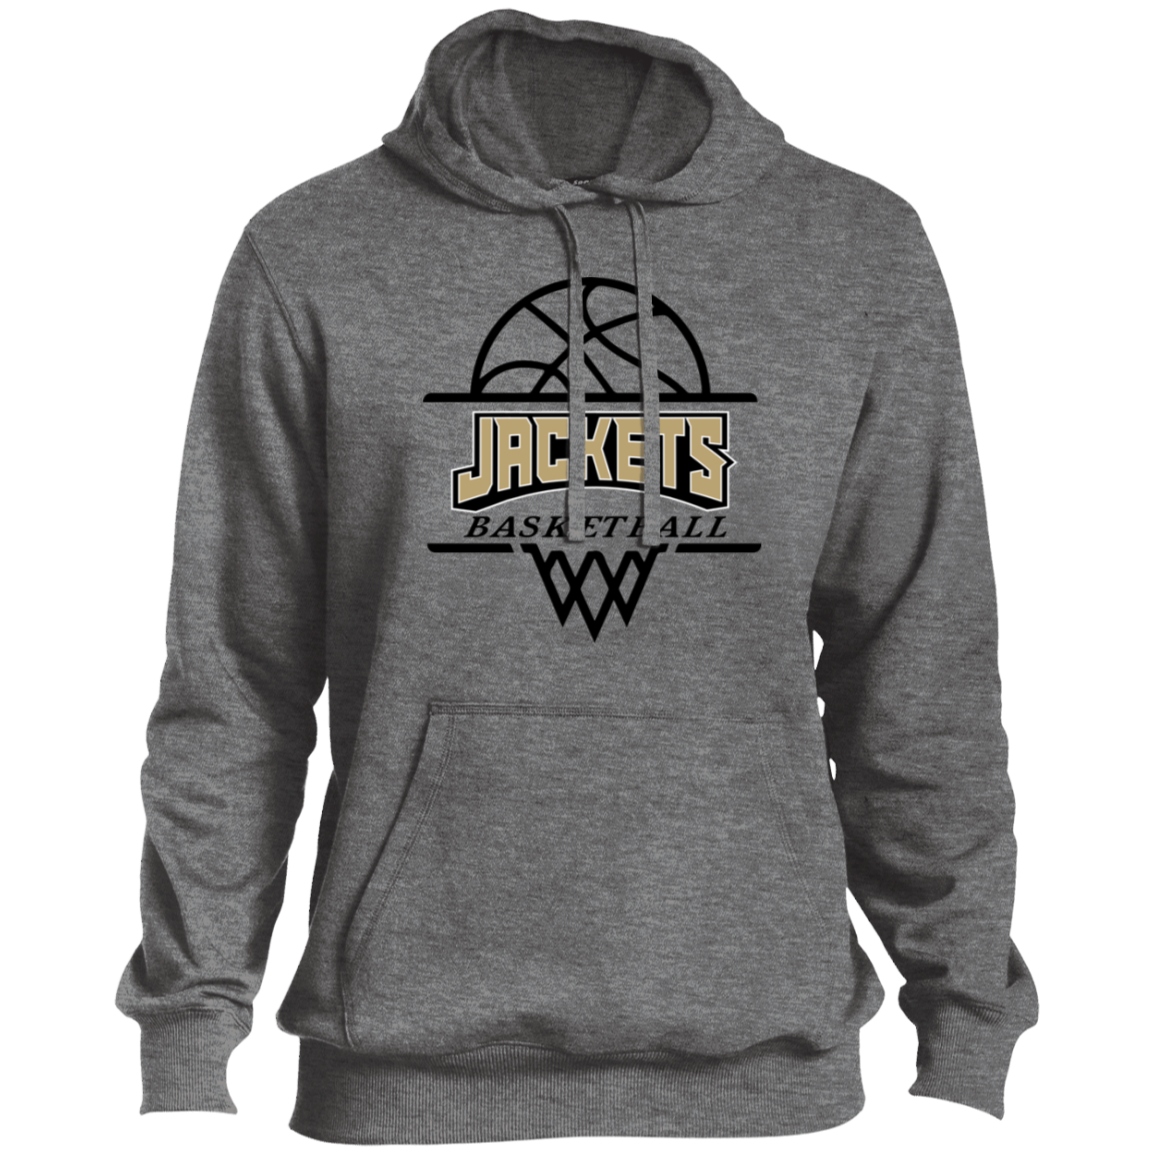 Jackets Basketball Pullover Hoodie (Home)